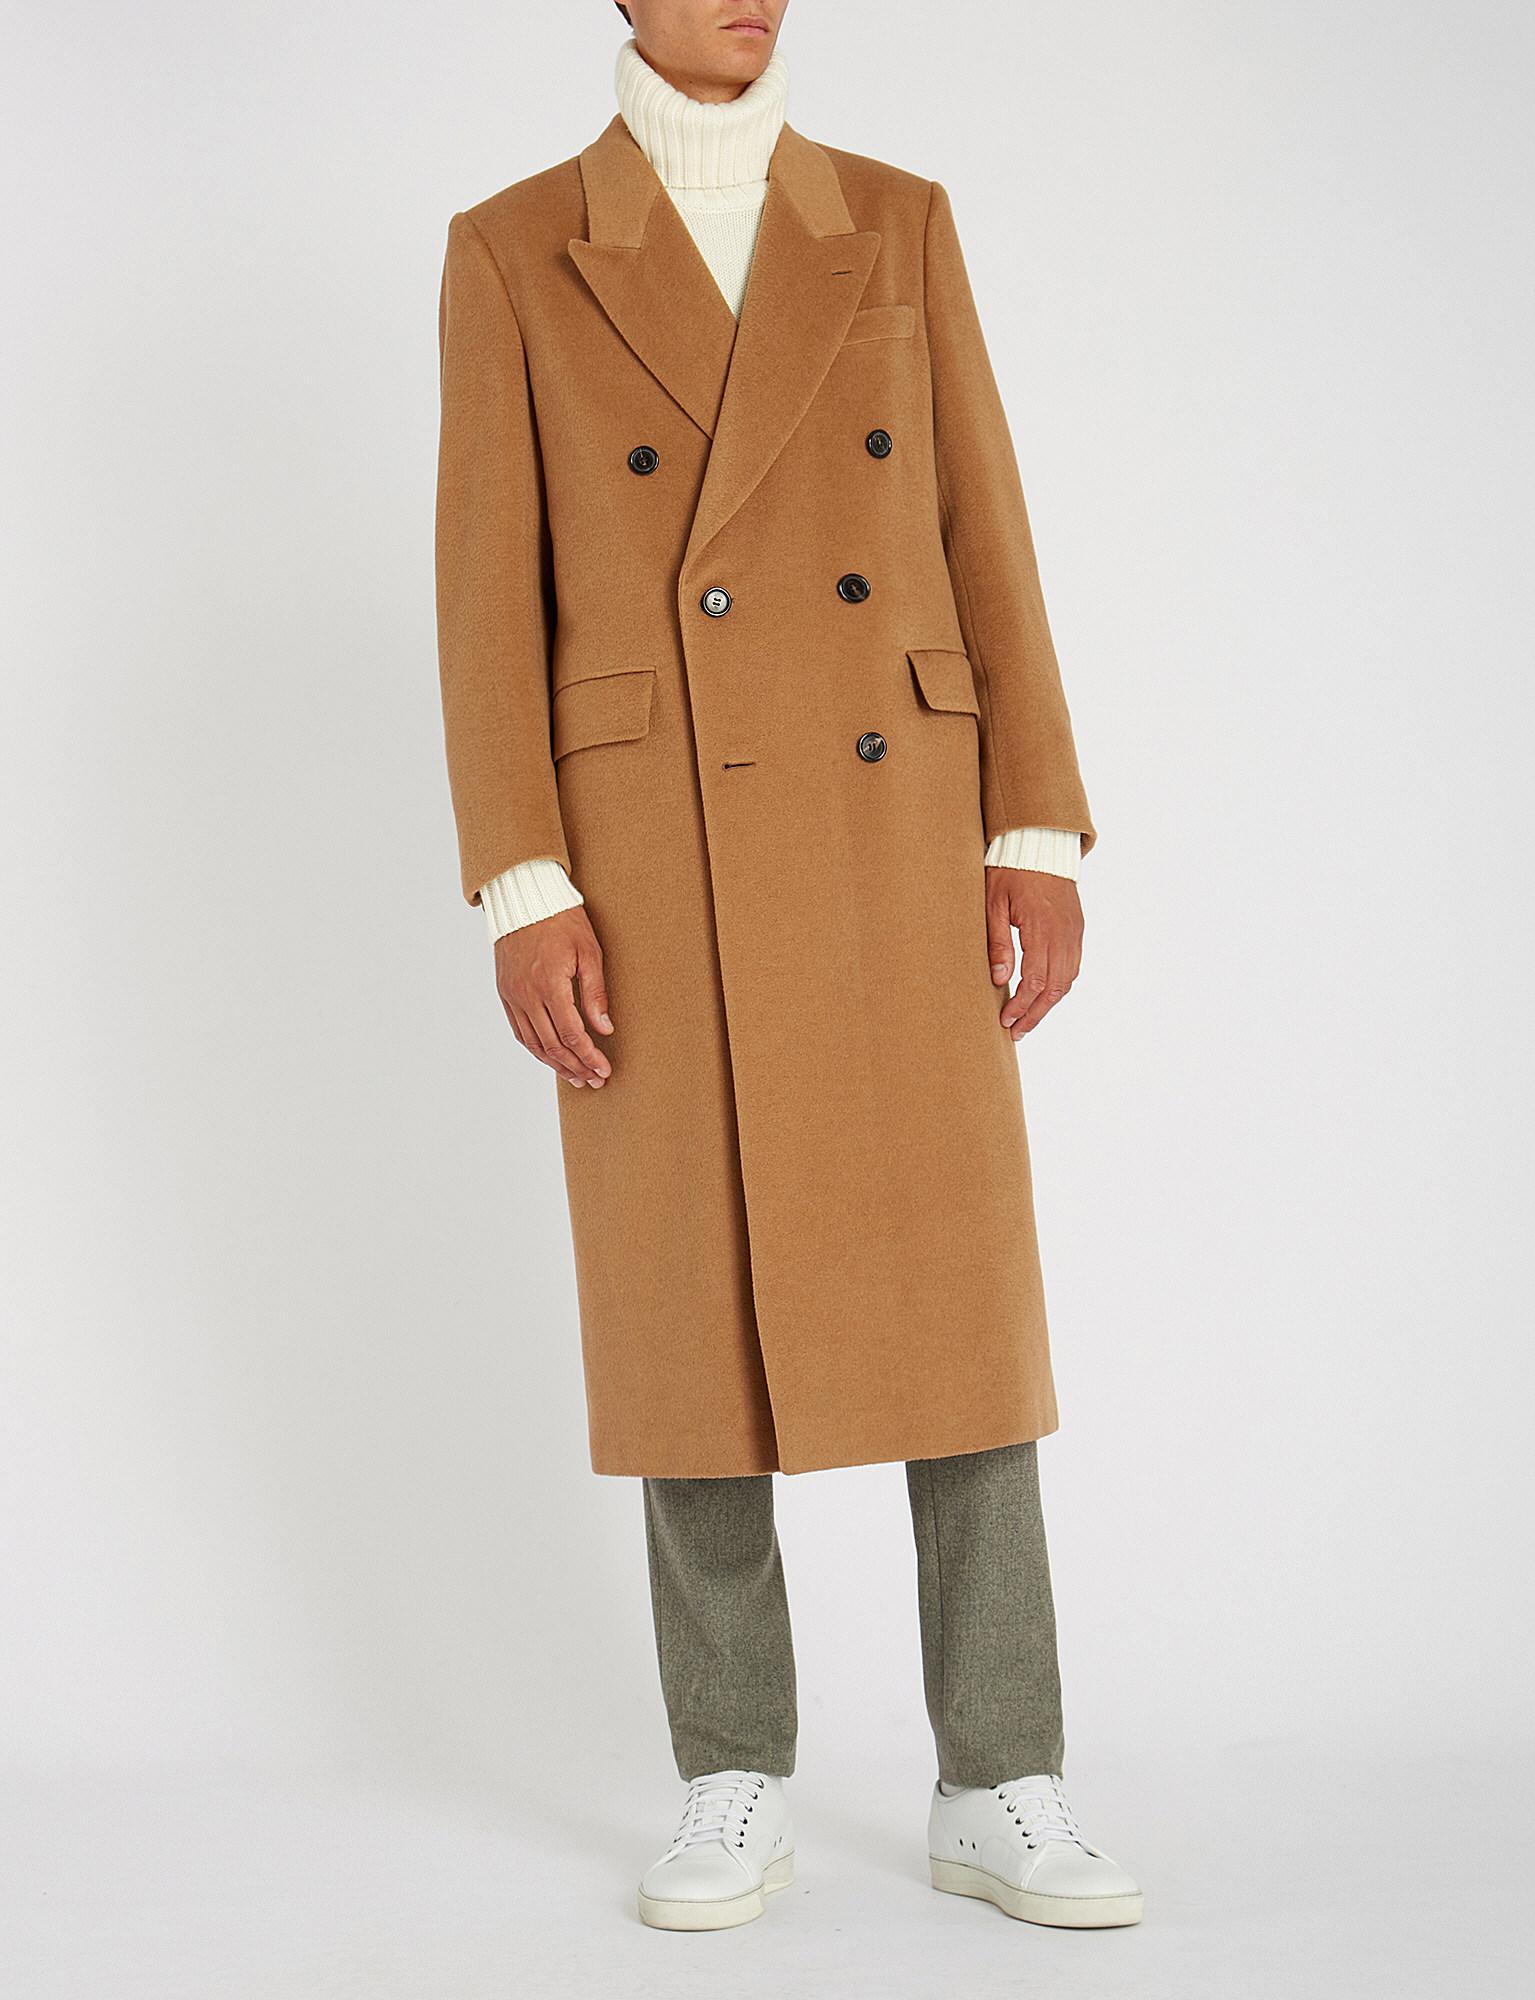 Brioni Double-breasted Camel-hair Coat in Natural for Men | Lyst UK